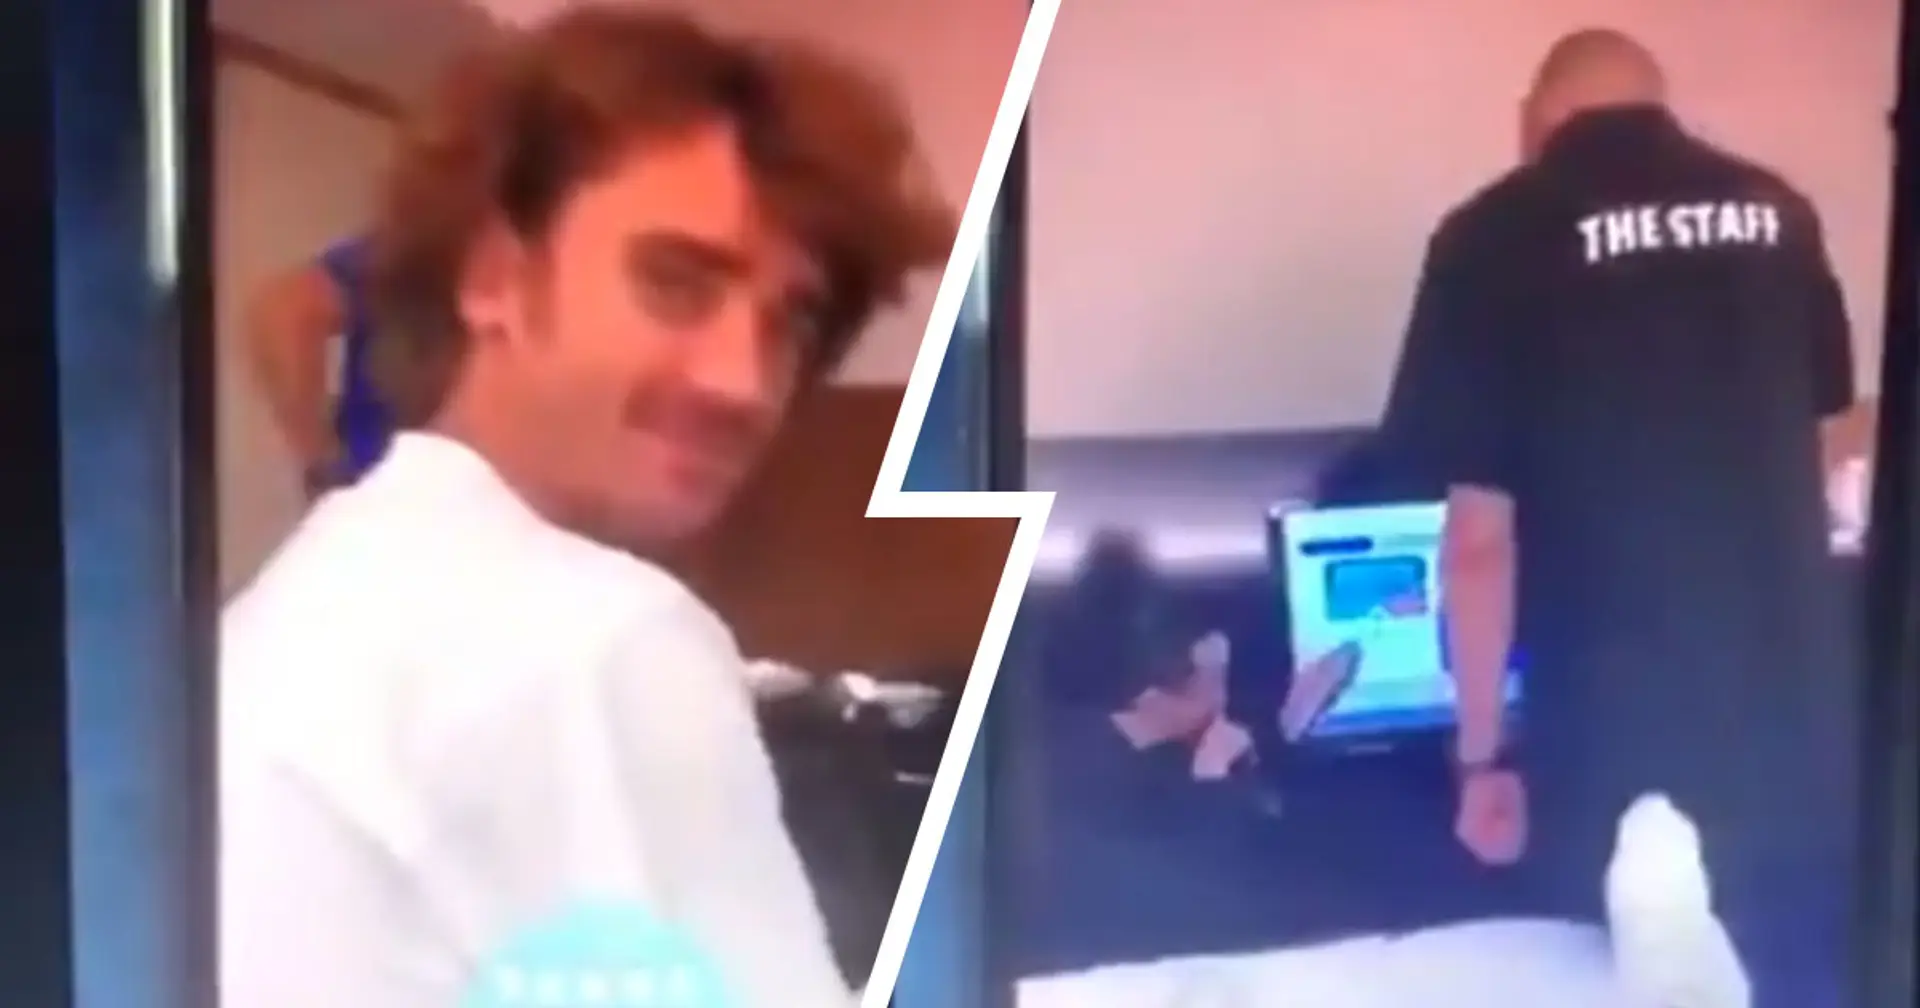 Leaked footage shows Griezmann and Dembele mocking Asian technicians at hotel, accused of racism